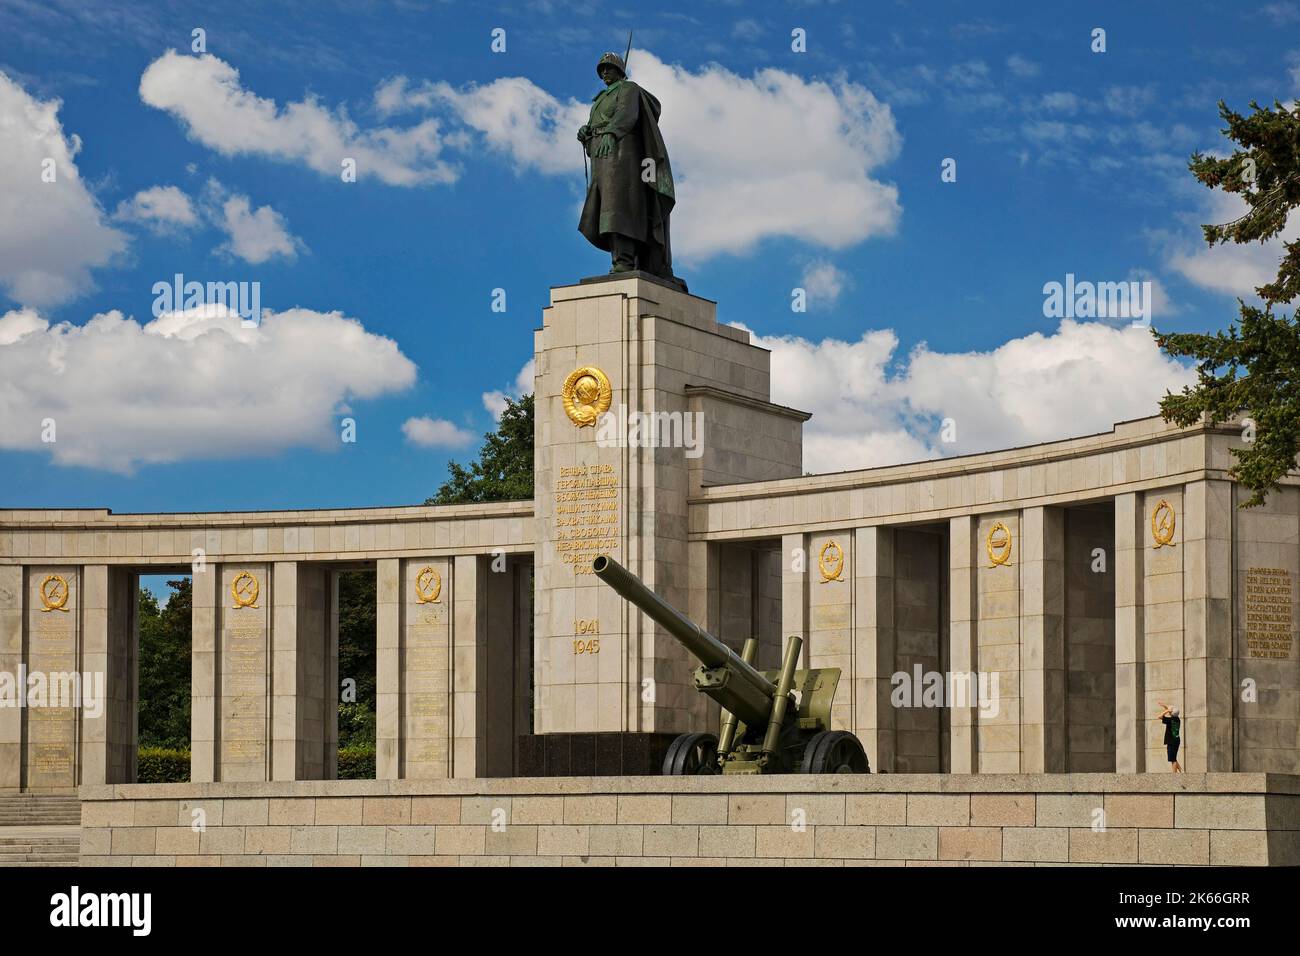 Soviet memorial with the statue of the Red Army soldier and the Golden State Coat of Arms, Germany, Berlin Stock Photo